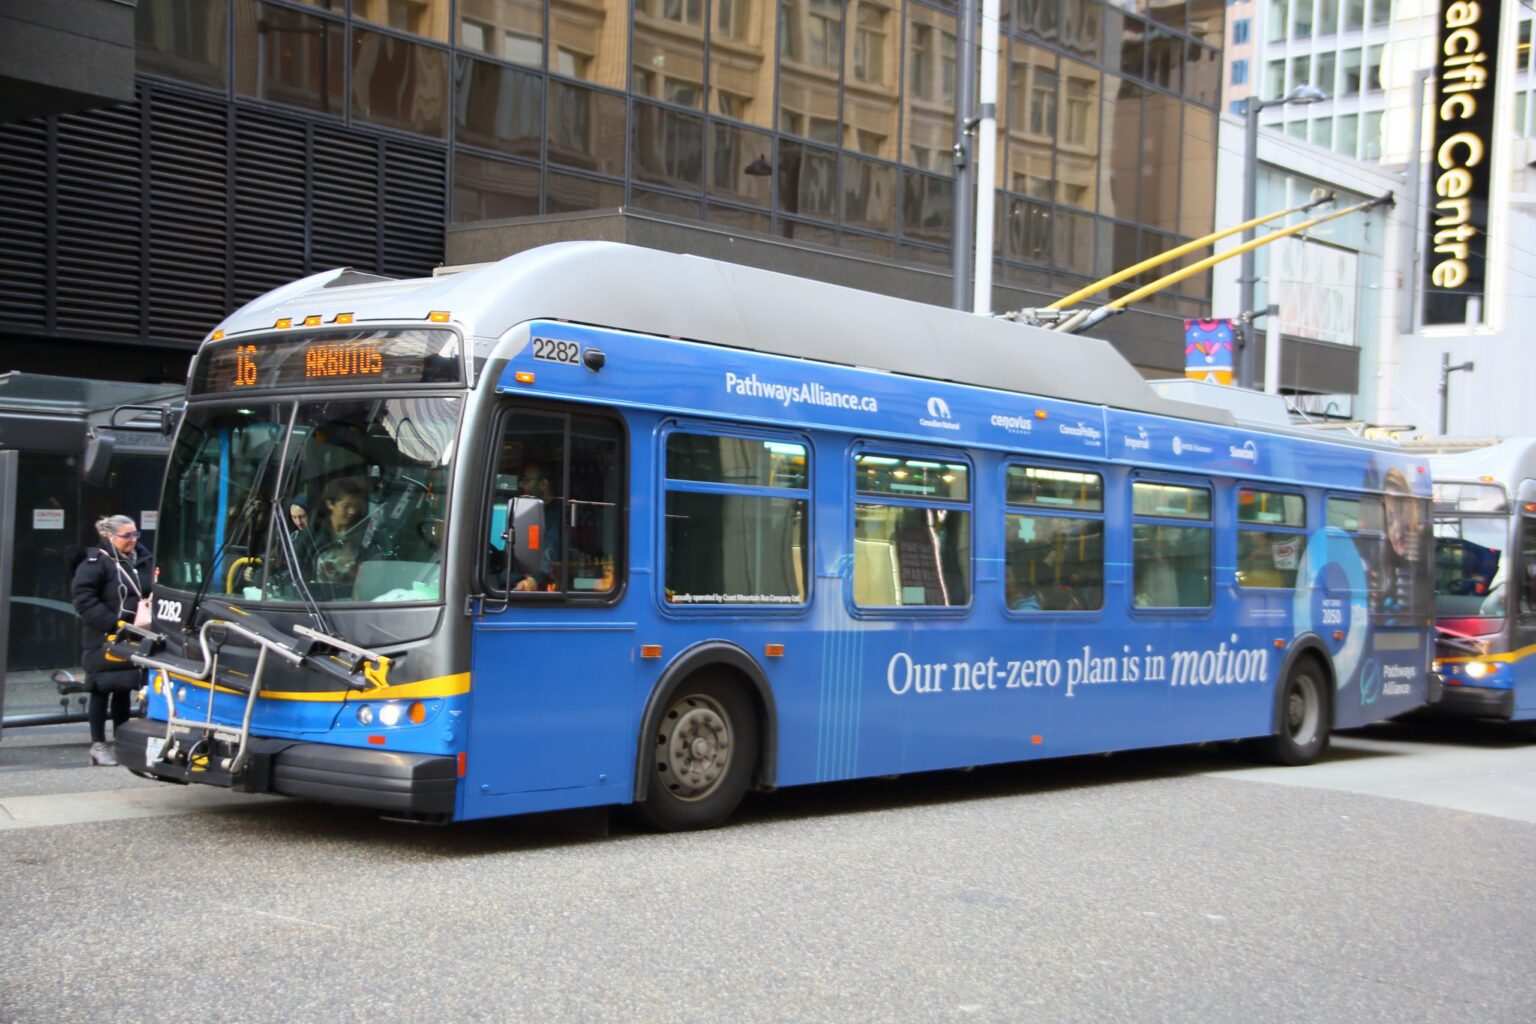 Pathways Alliance ad on a Vancouver bus.